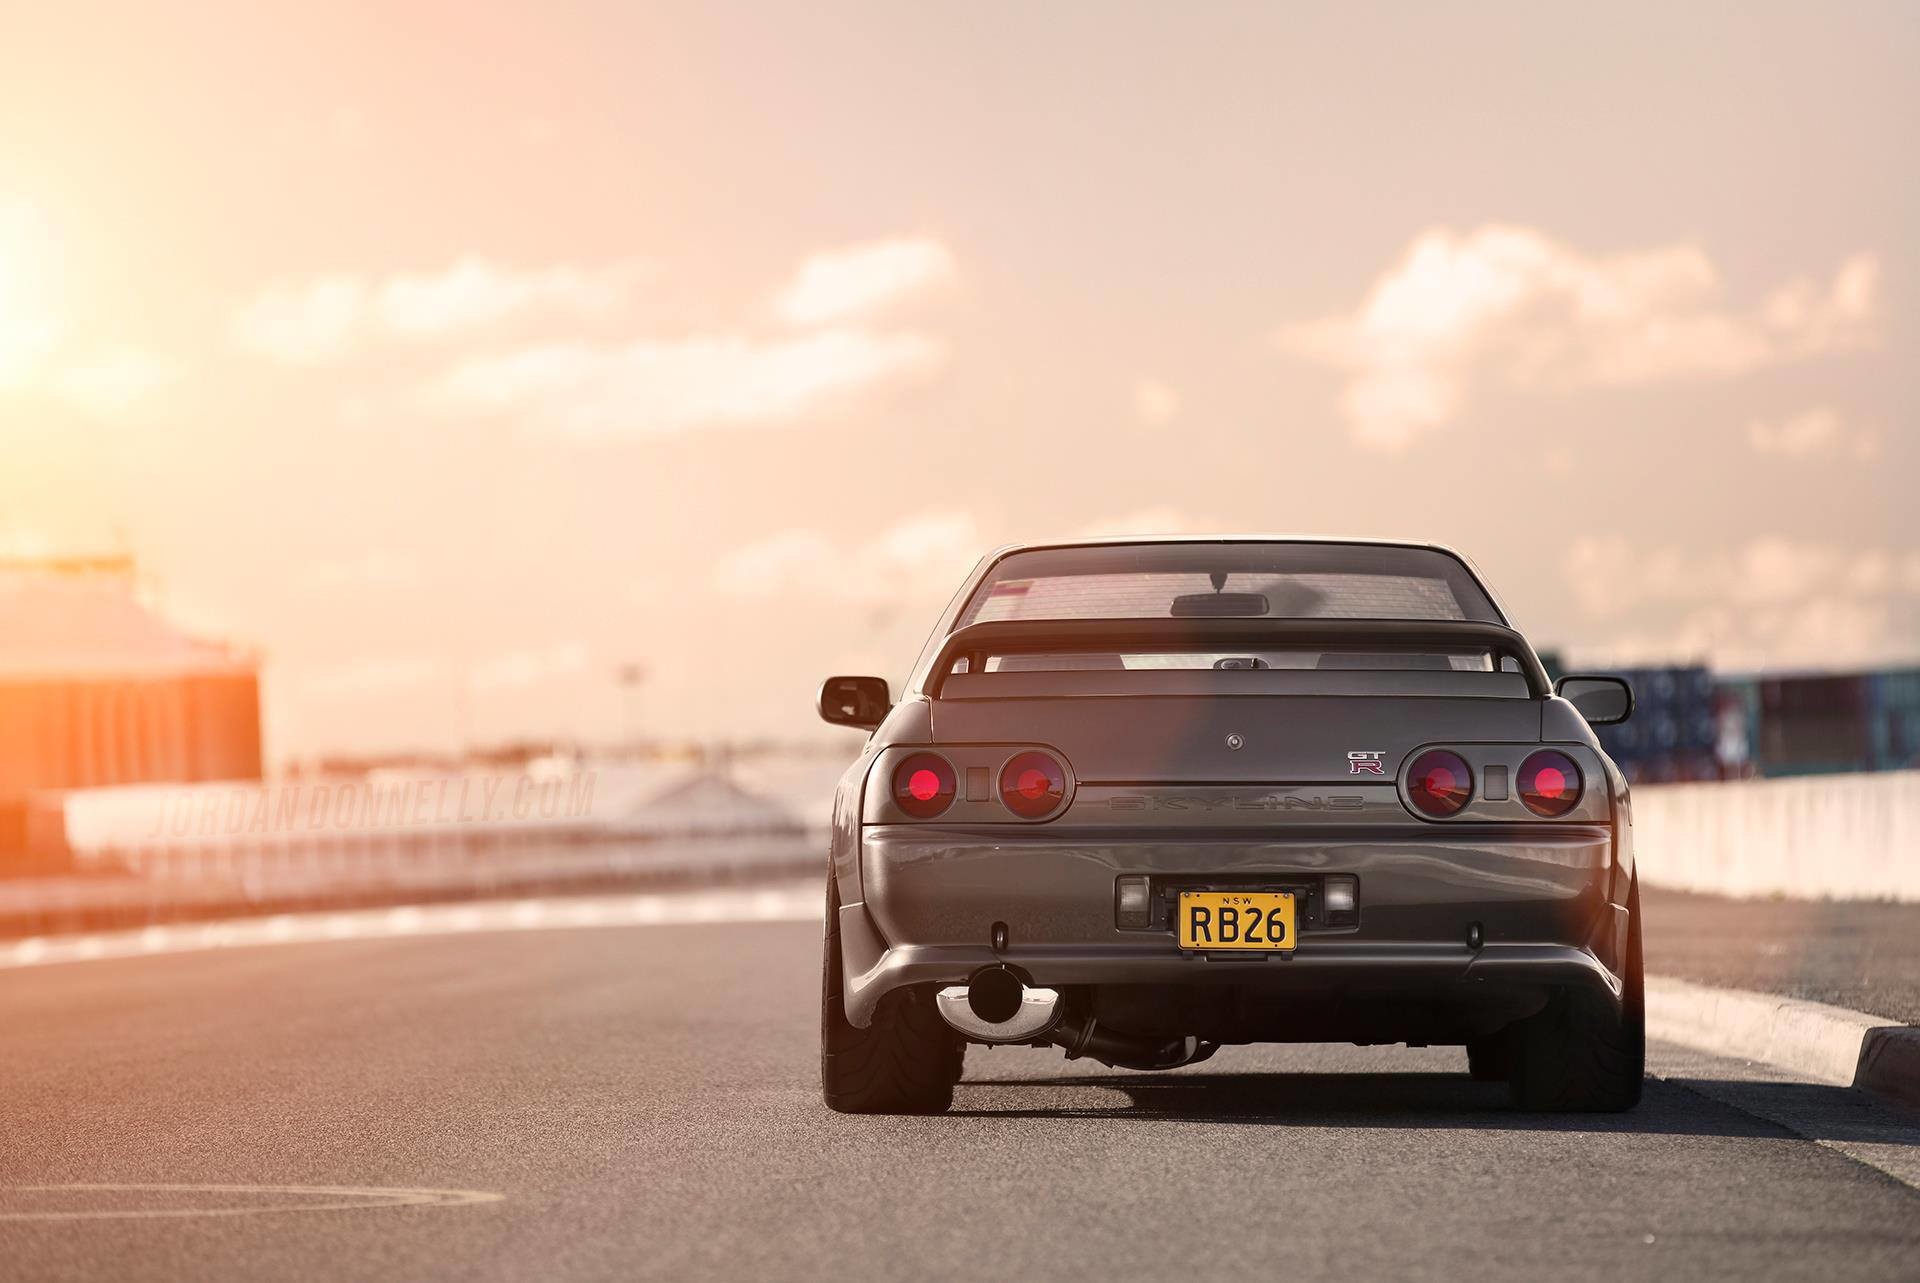 Skyline R32 Wallpapers 66 Images